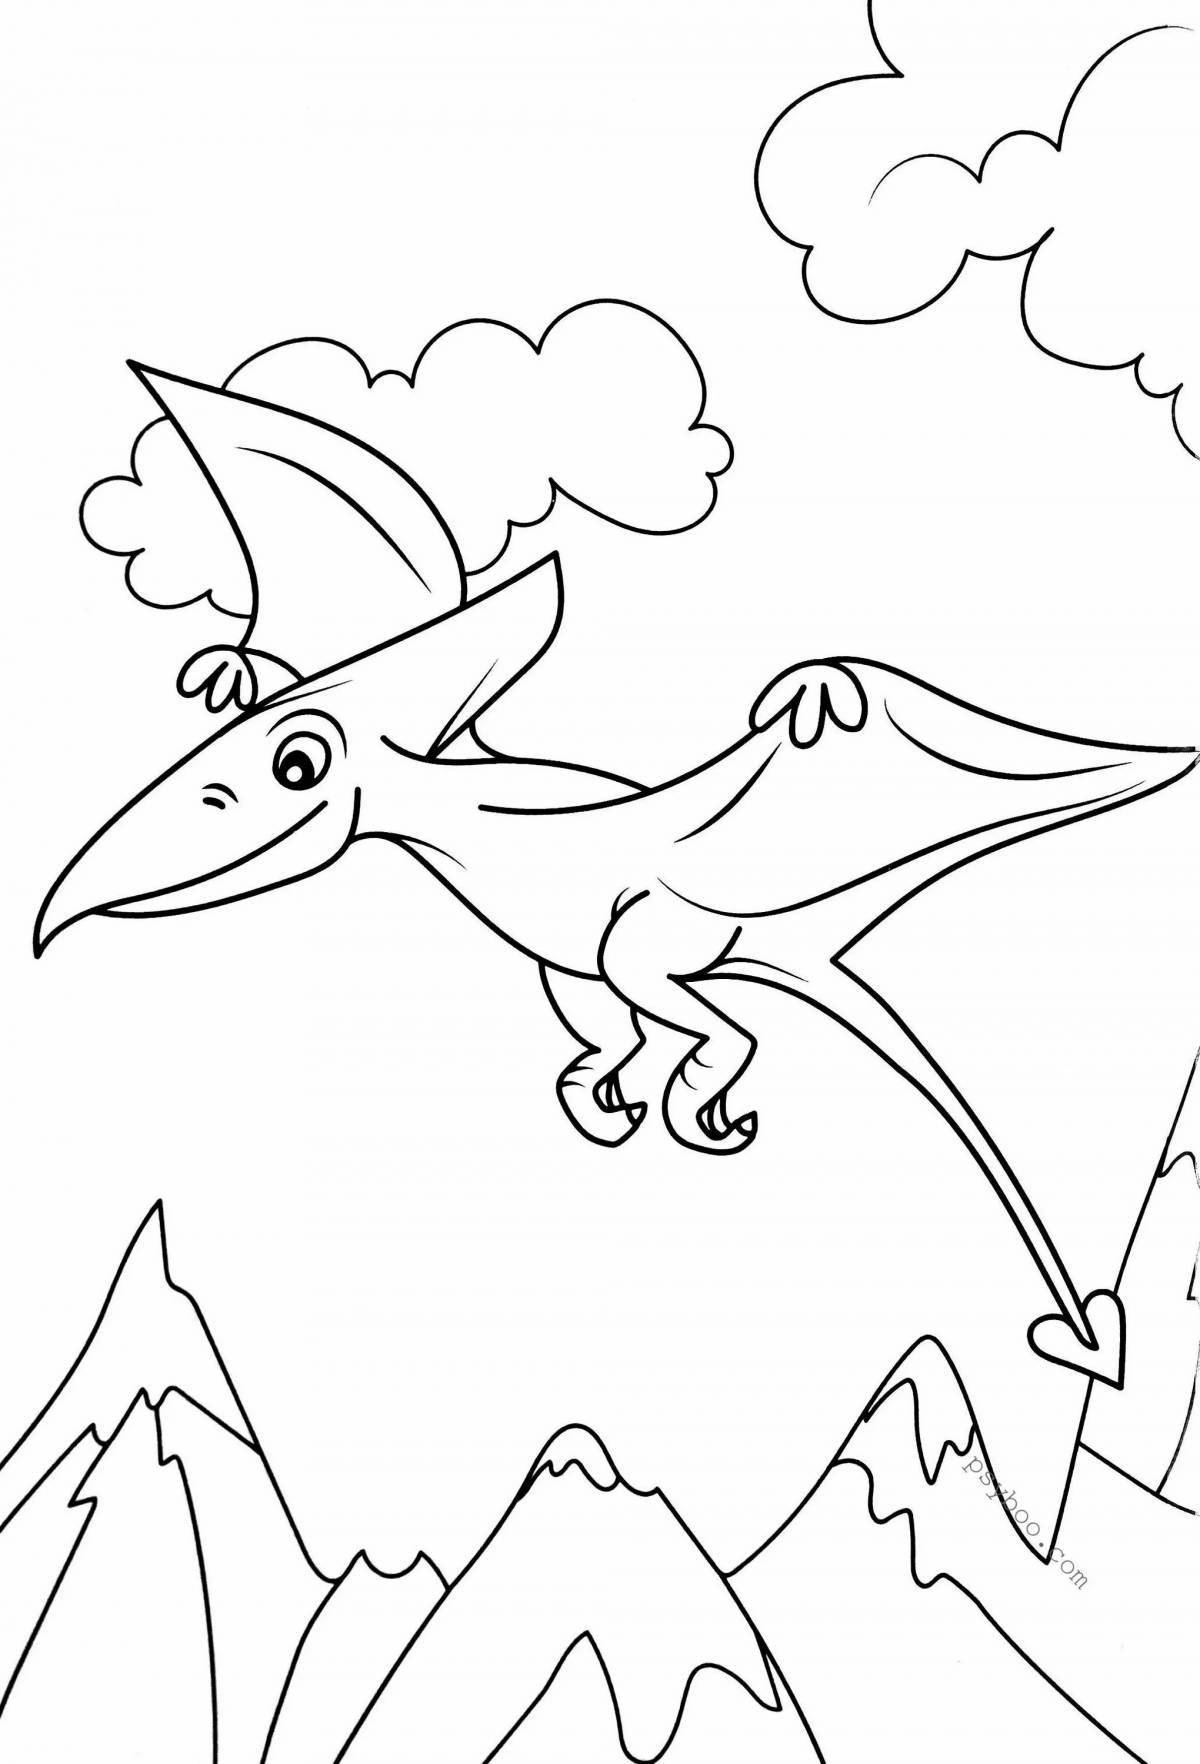 Colorful pterodactyl coloring book for kids